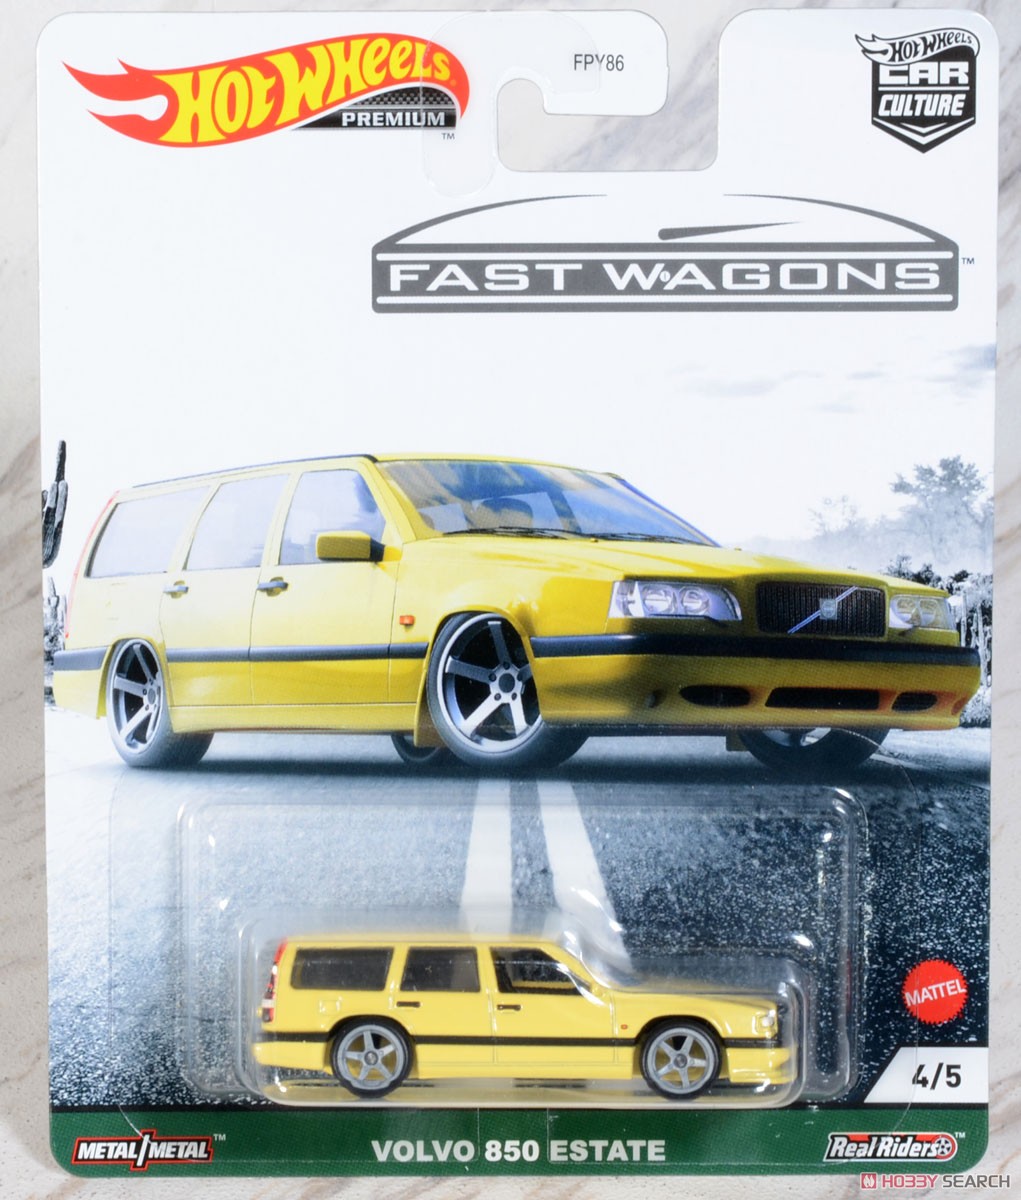 Hot Wheels Car Culture Fast wagon - Volvo 850 estate (Toy) Package1